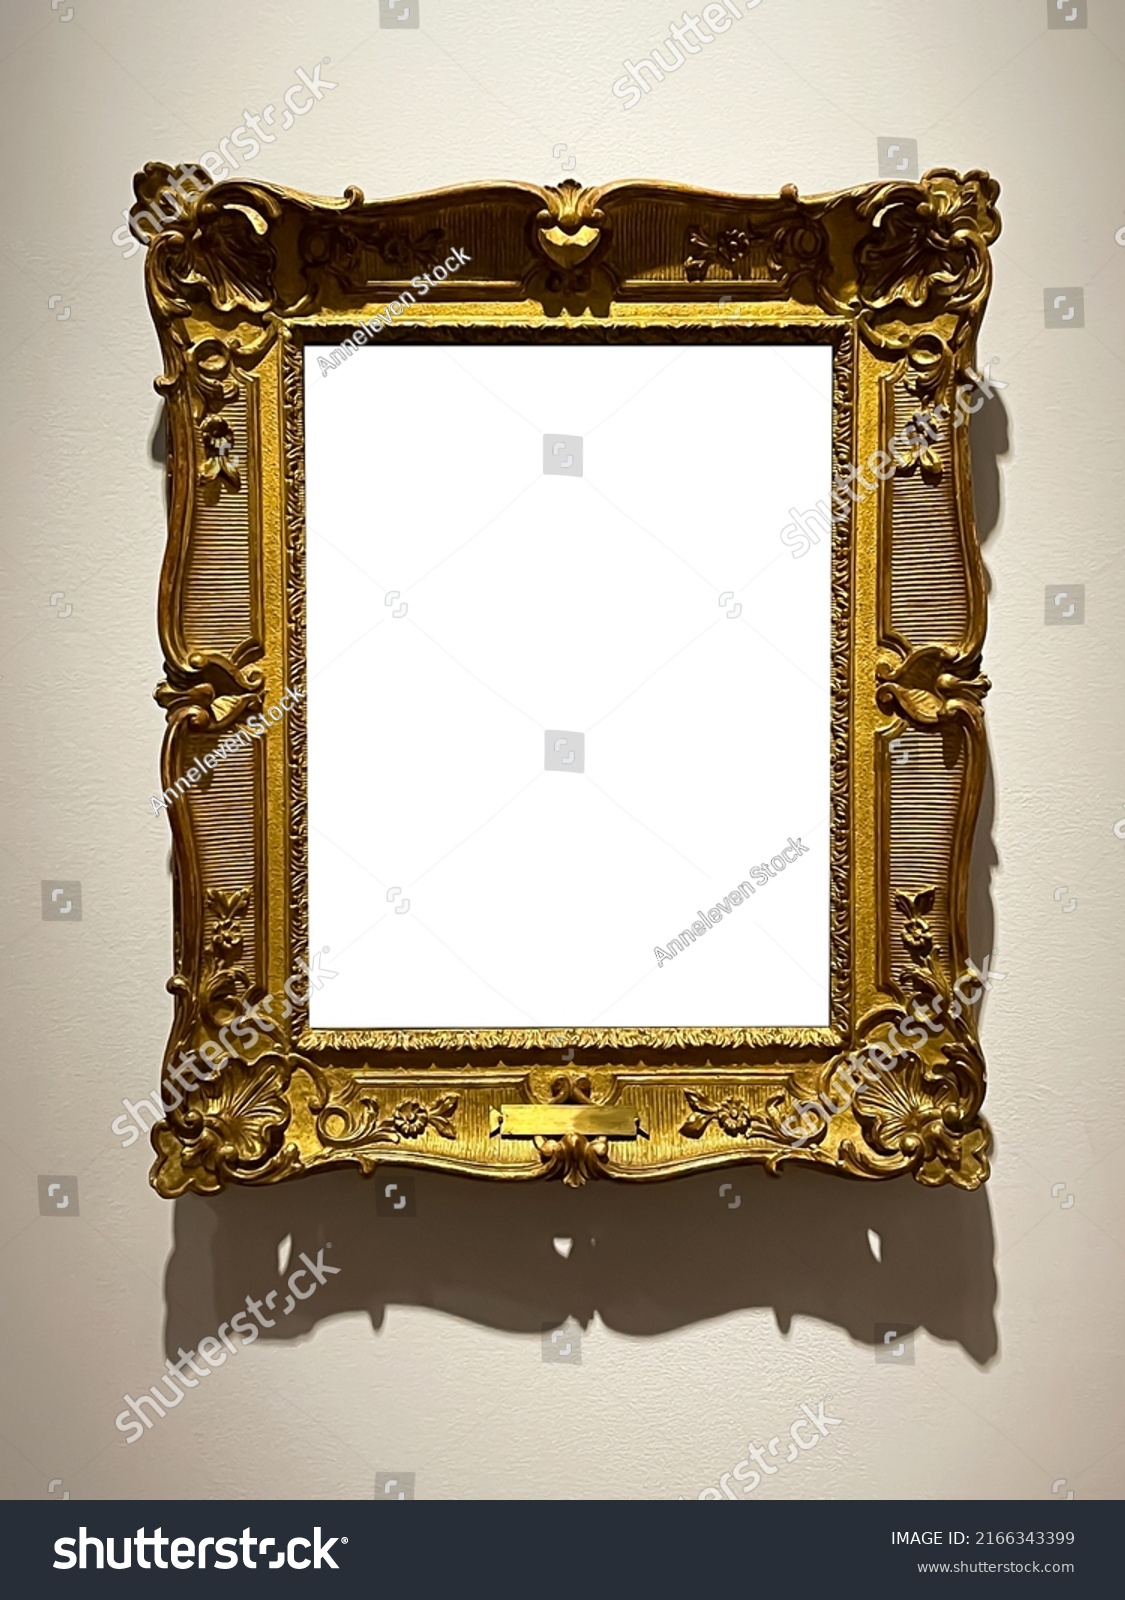 Antique golden art fair gallery frame on the wall at auction house or museum exhibition, blank template with empty white copyspace for mockup design, artwork concept #2166343399